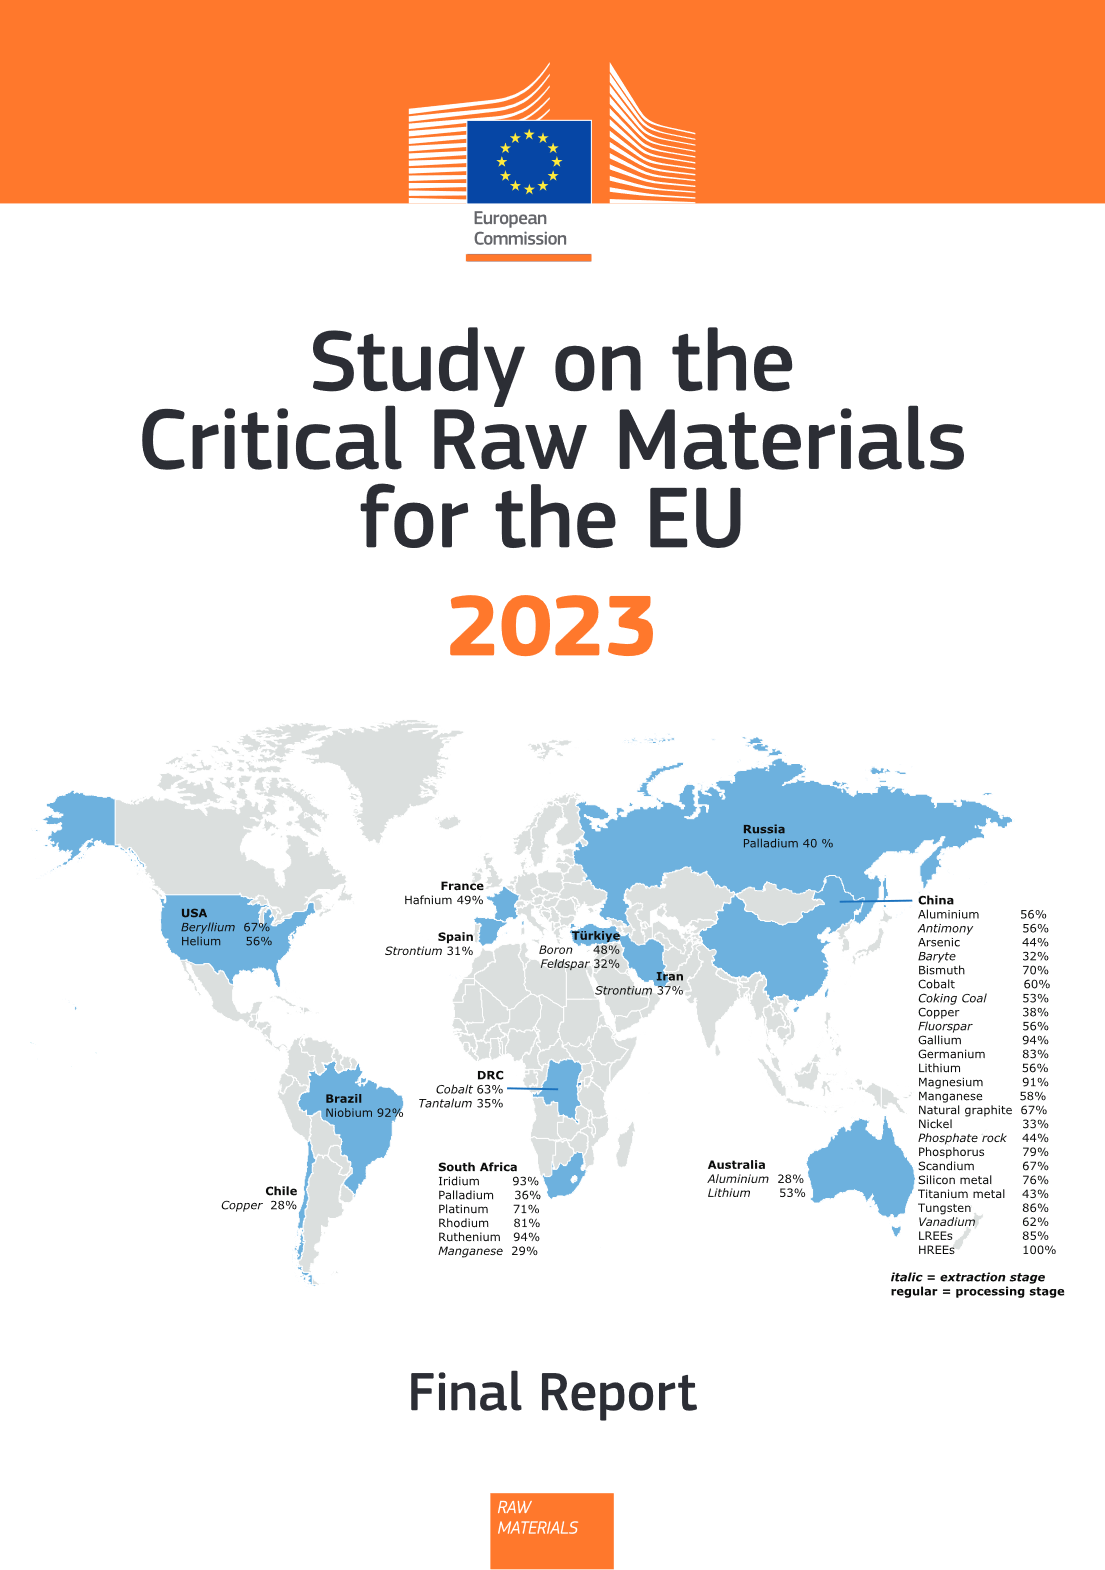 Study on the Critical Raw Materials for the EU 2023